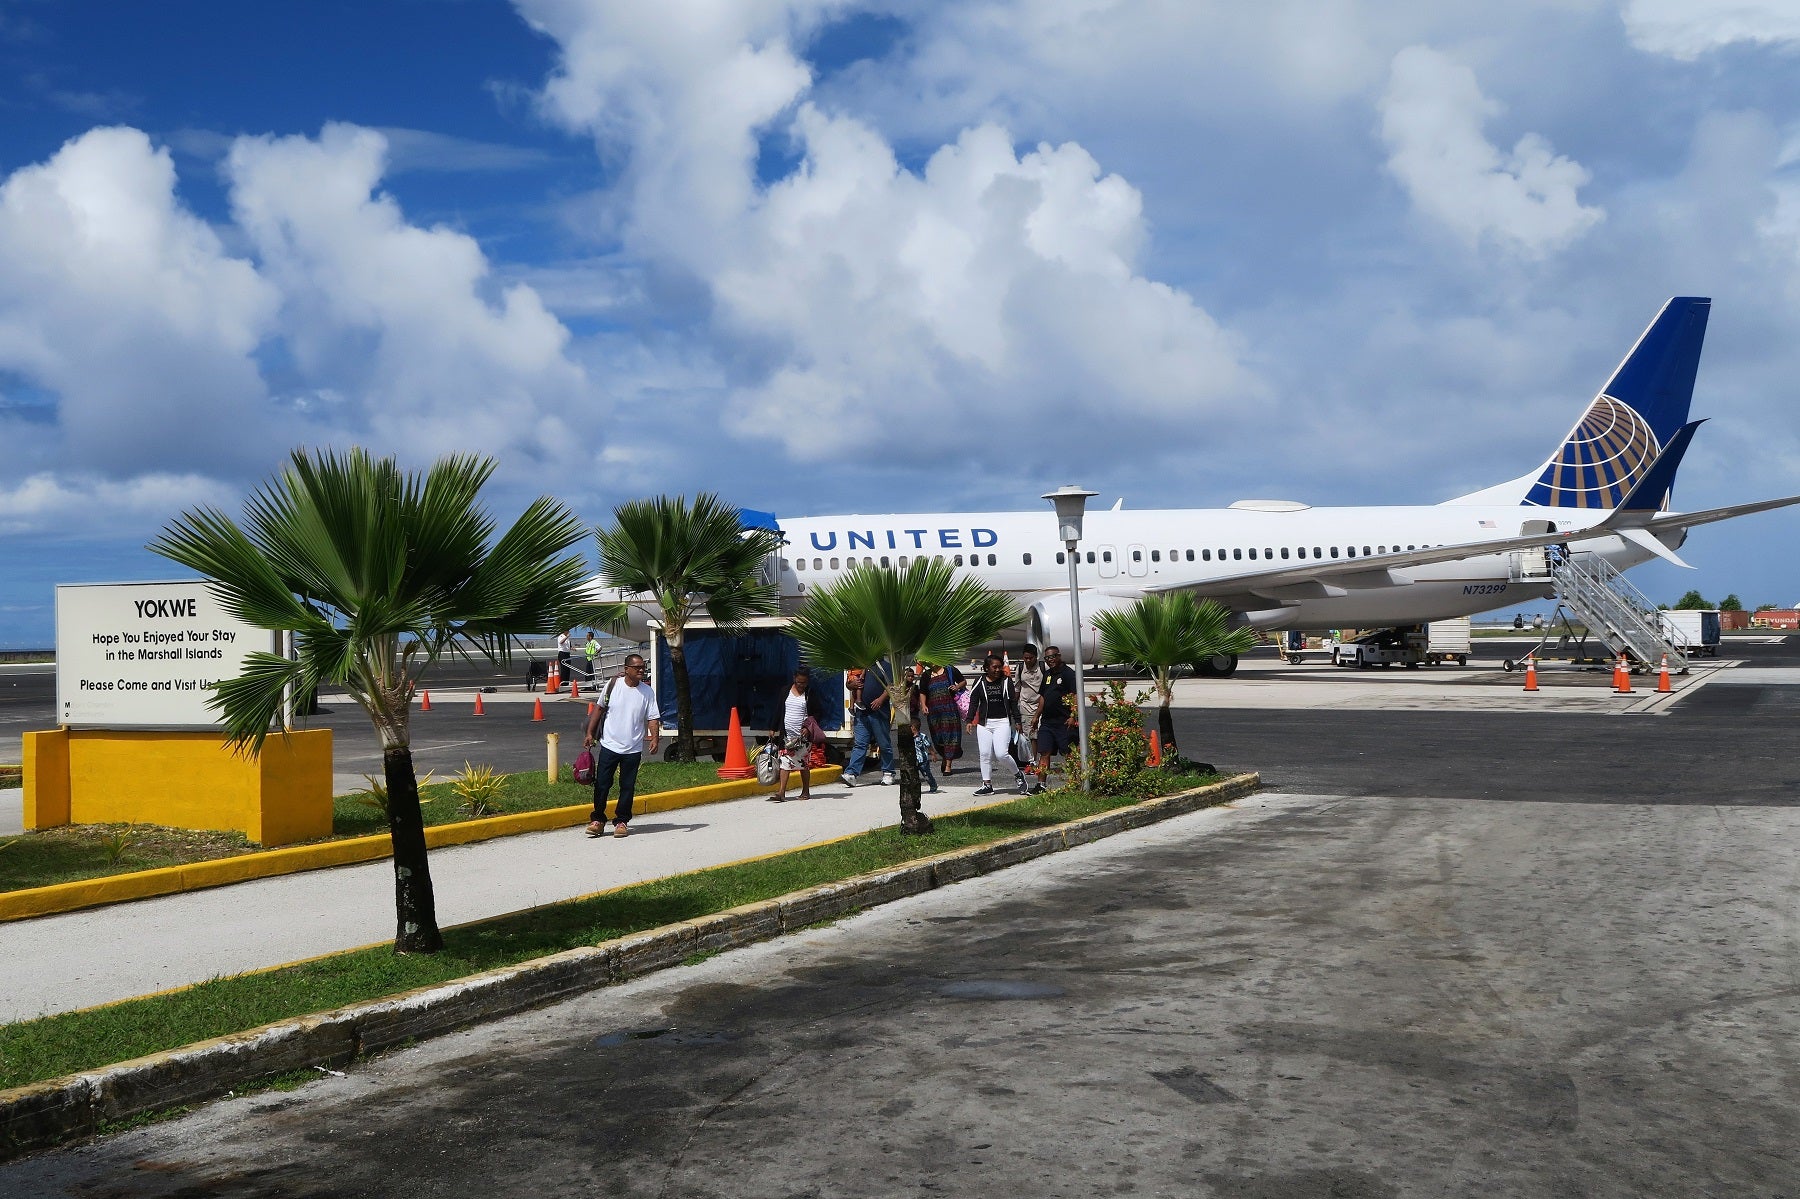 Dreaming of the Pacific Islands: United’s Island Hopper and my bucket list trip post-corona